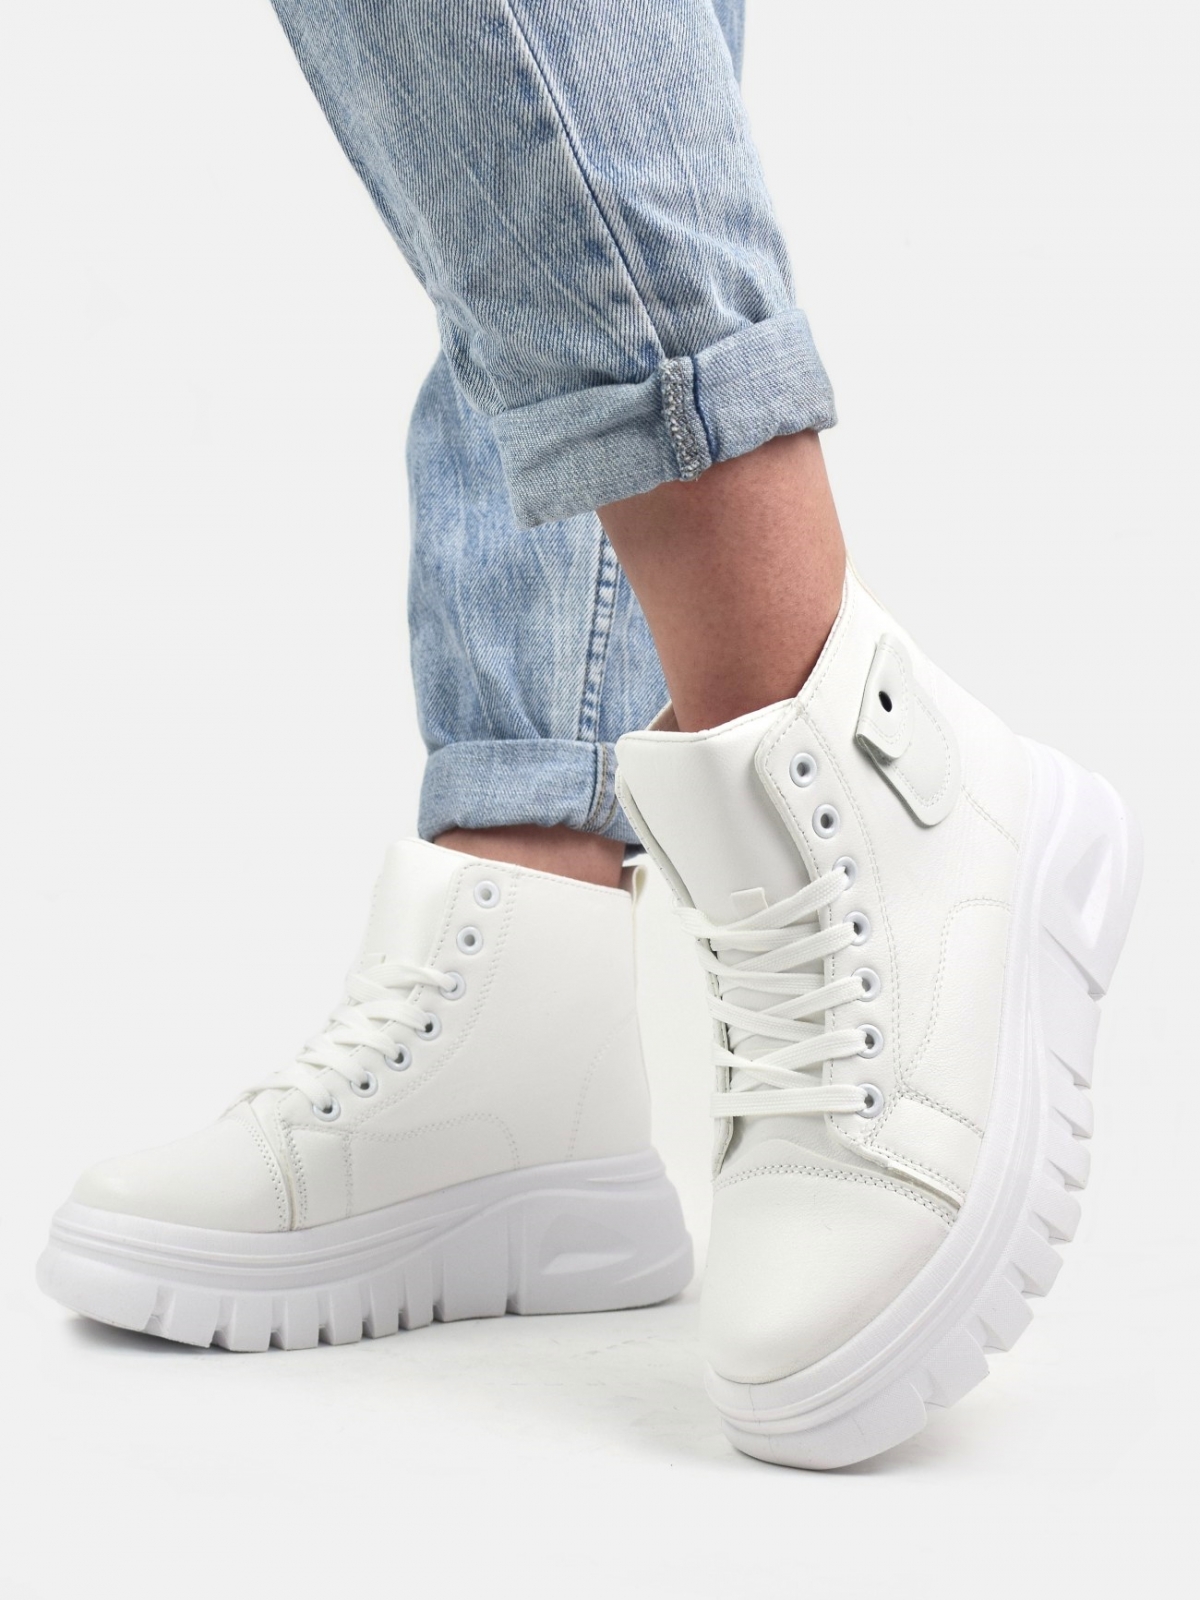 American style sneaker with thick sole & mini pocket in white